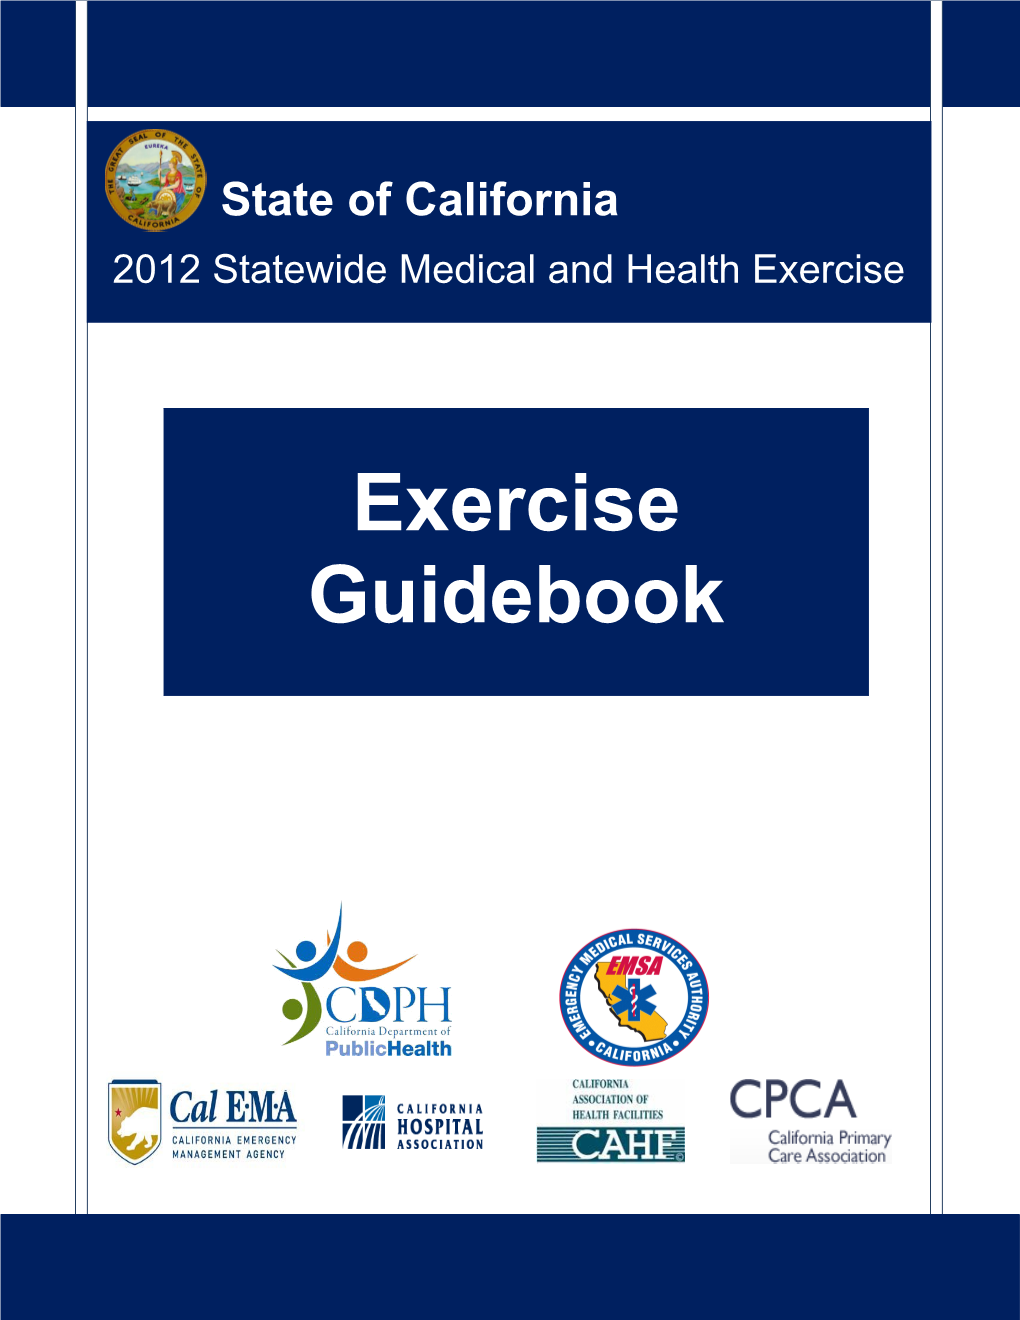 2012 Statewide Medical & Health Exercise Guidebook